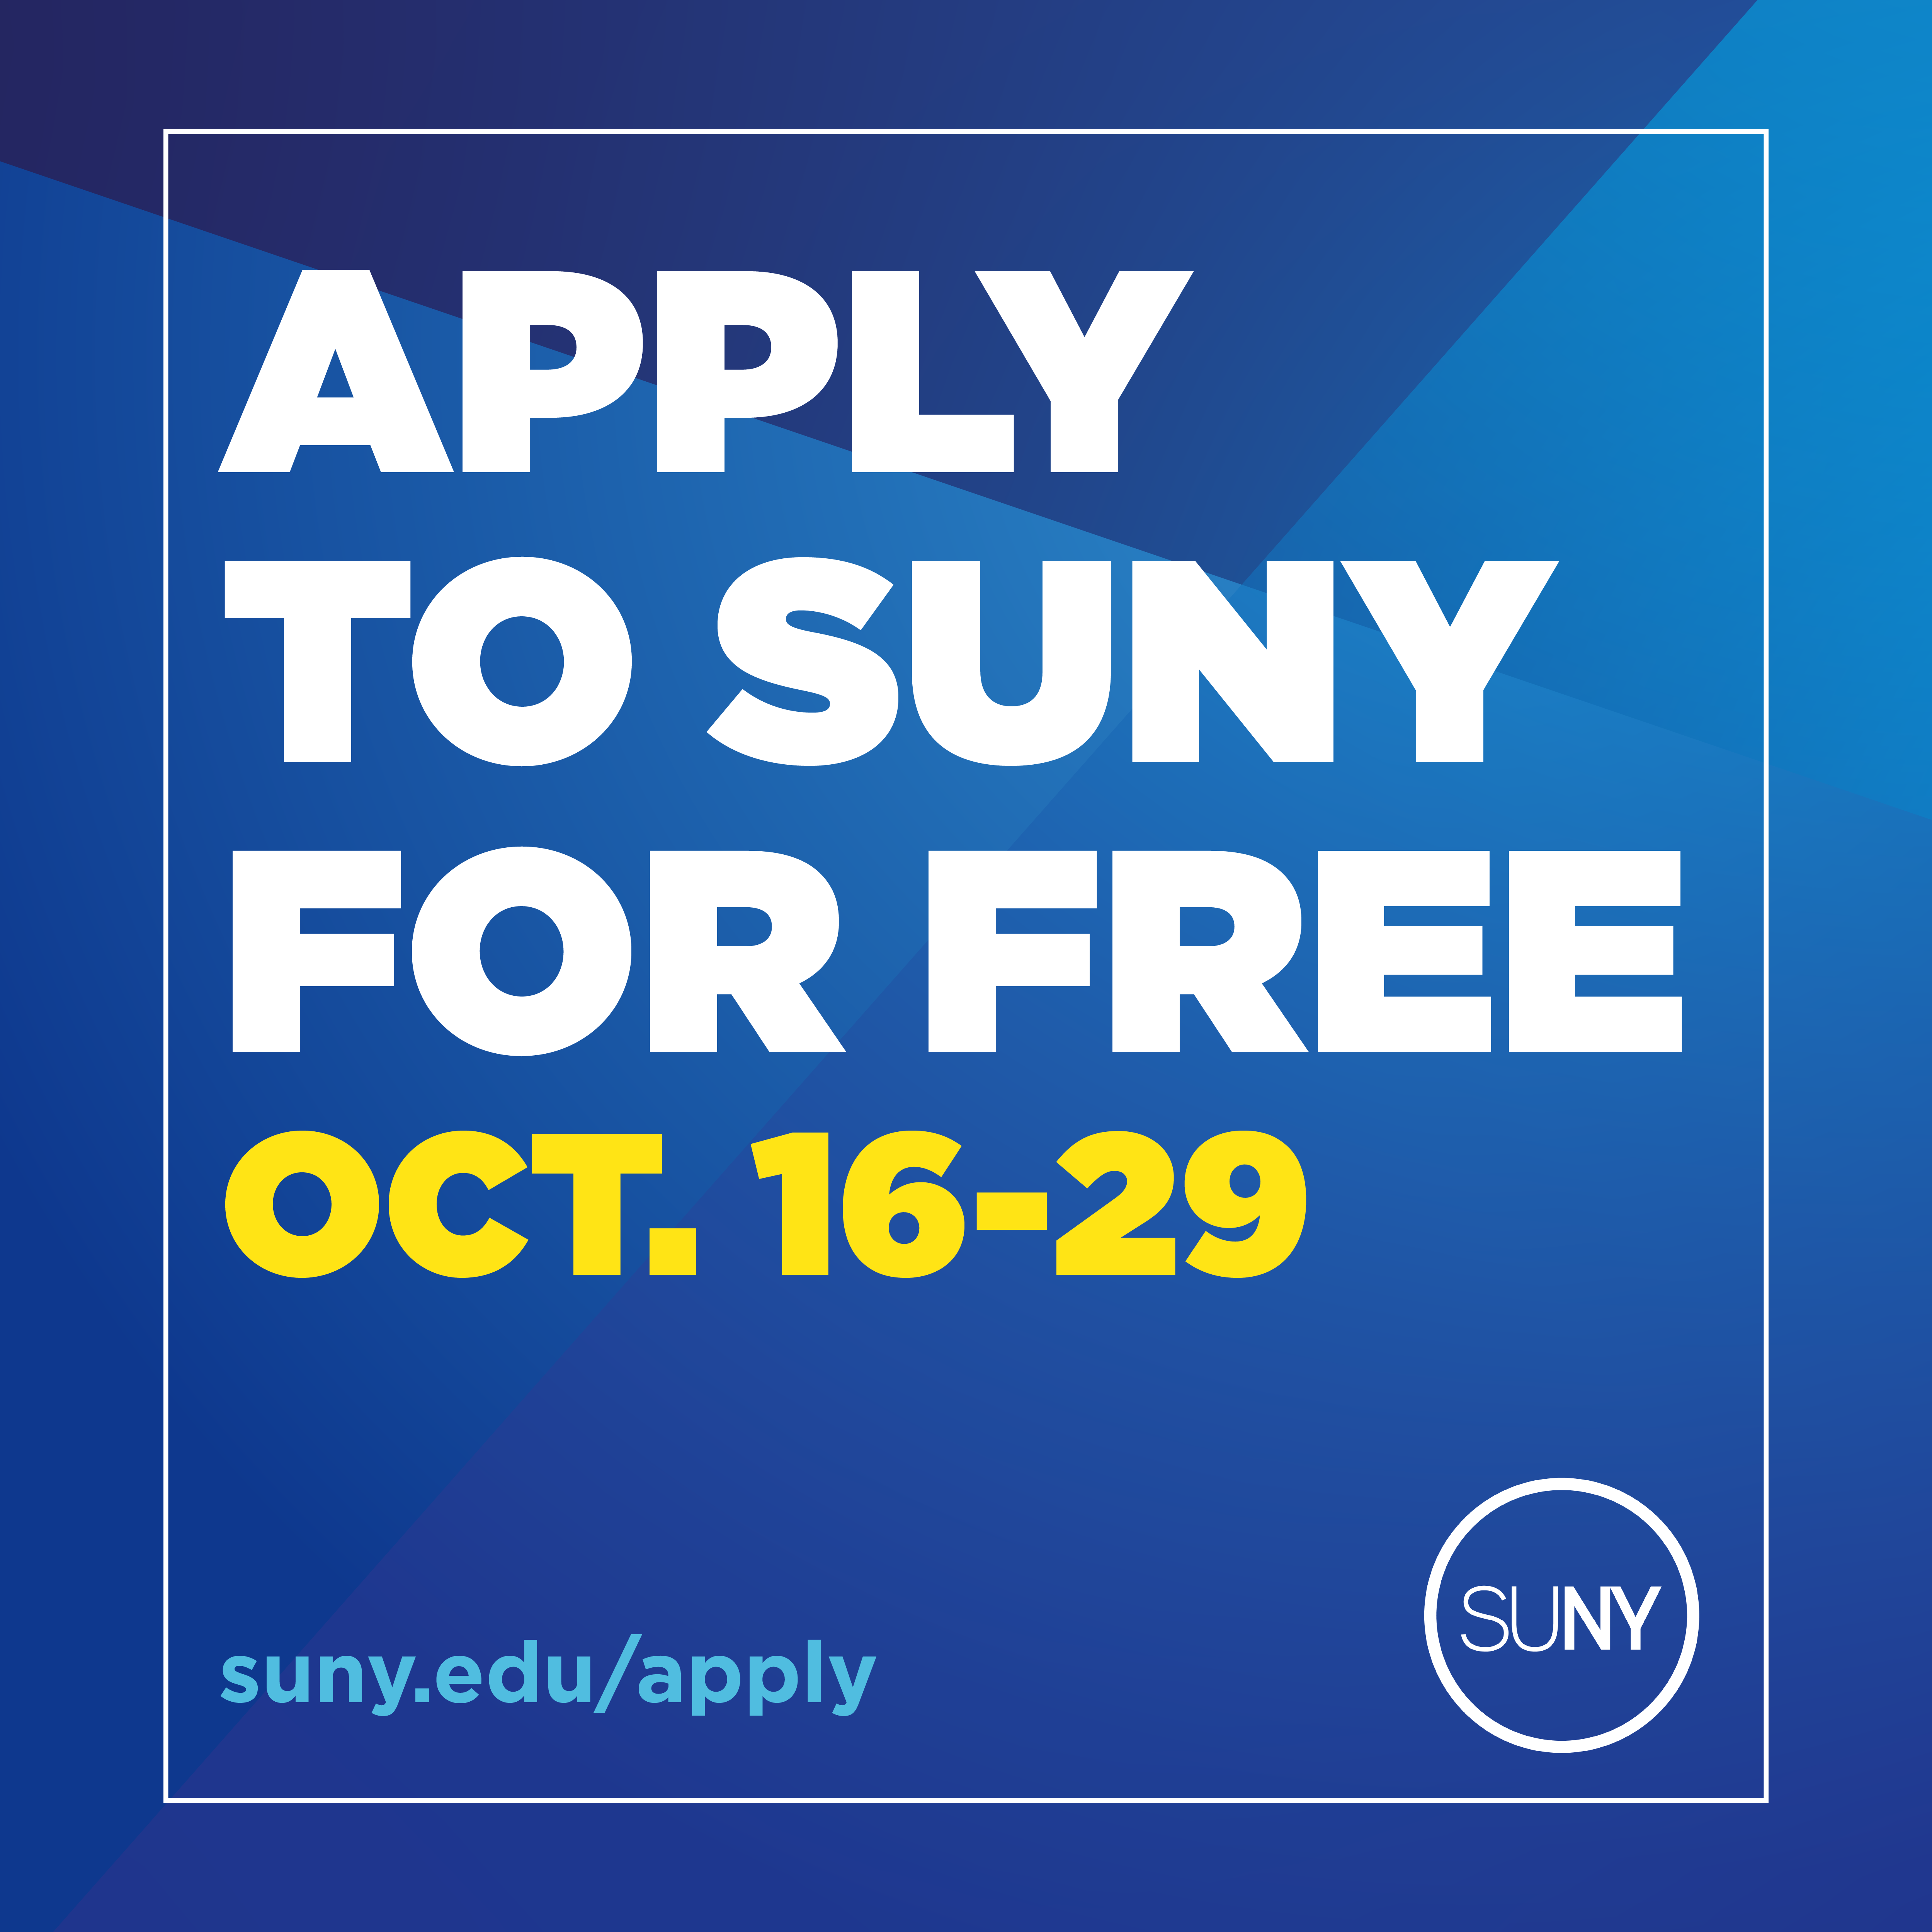 Apply to SUNY for free image